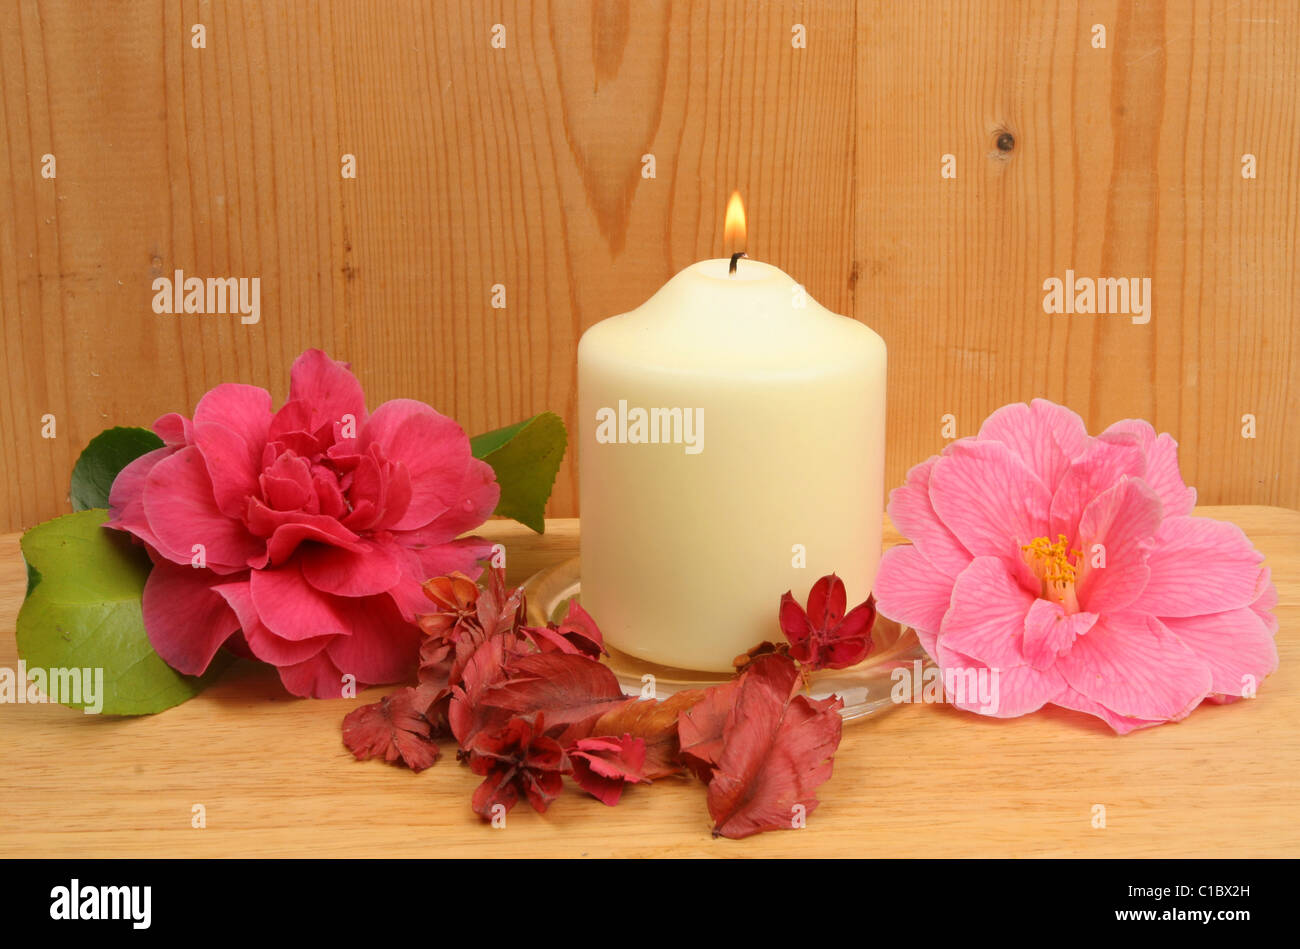 Candle and camellia flowers on a background of pine wood Stock Photo